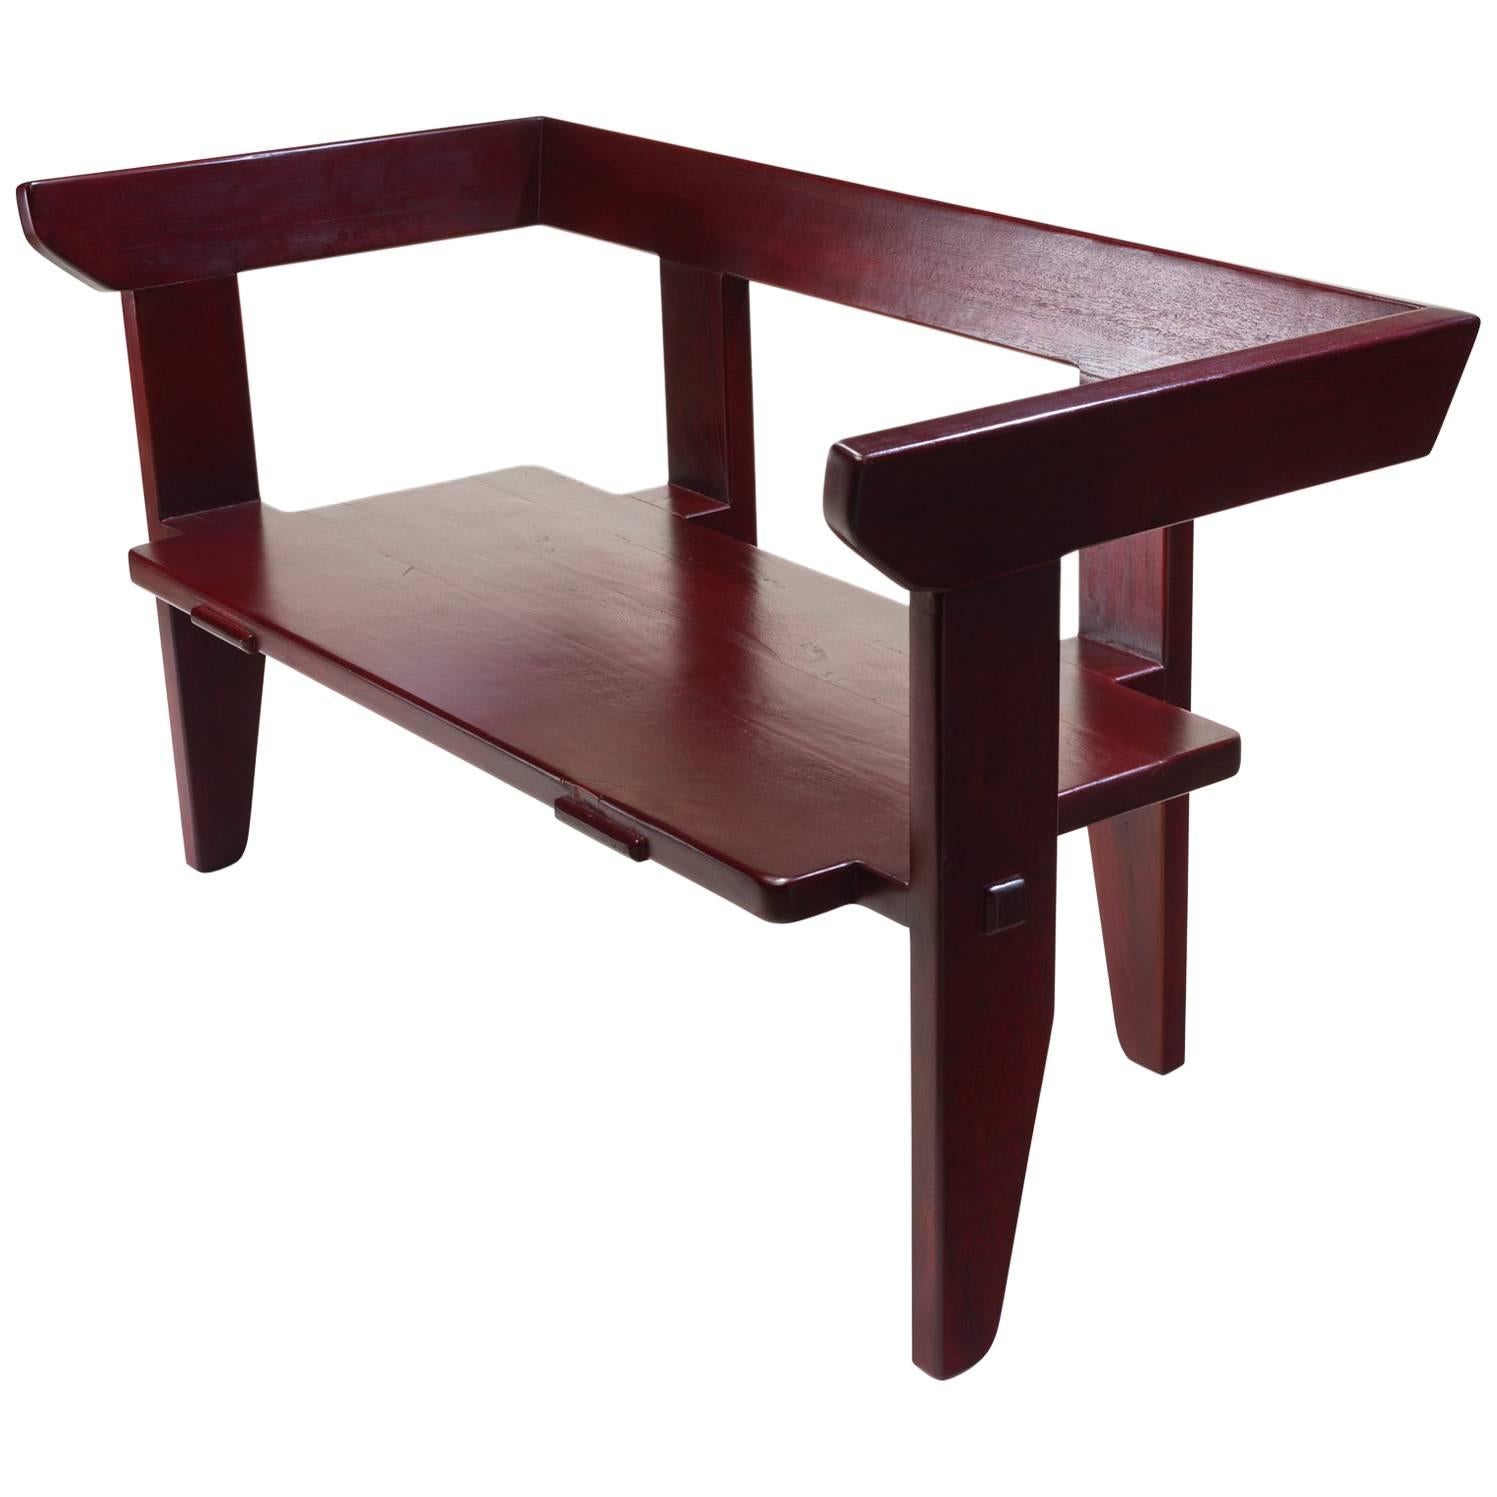 Laredo Bench Contemporary Design Traditional Joinery, Hardwood w/ Lacquer Finish For Sale